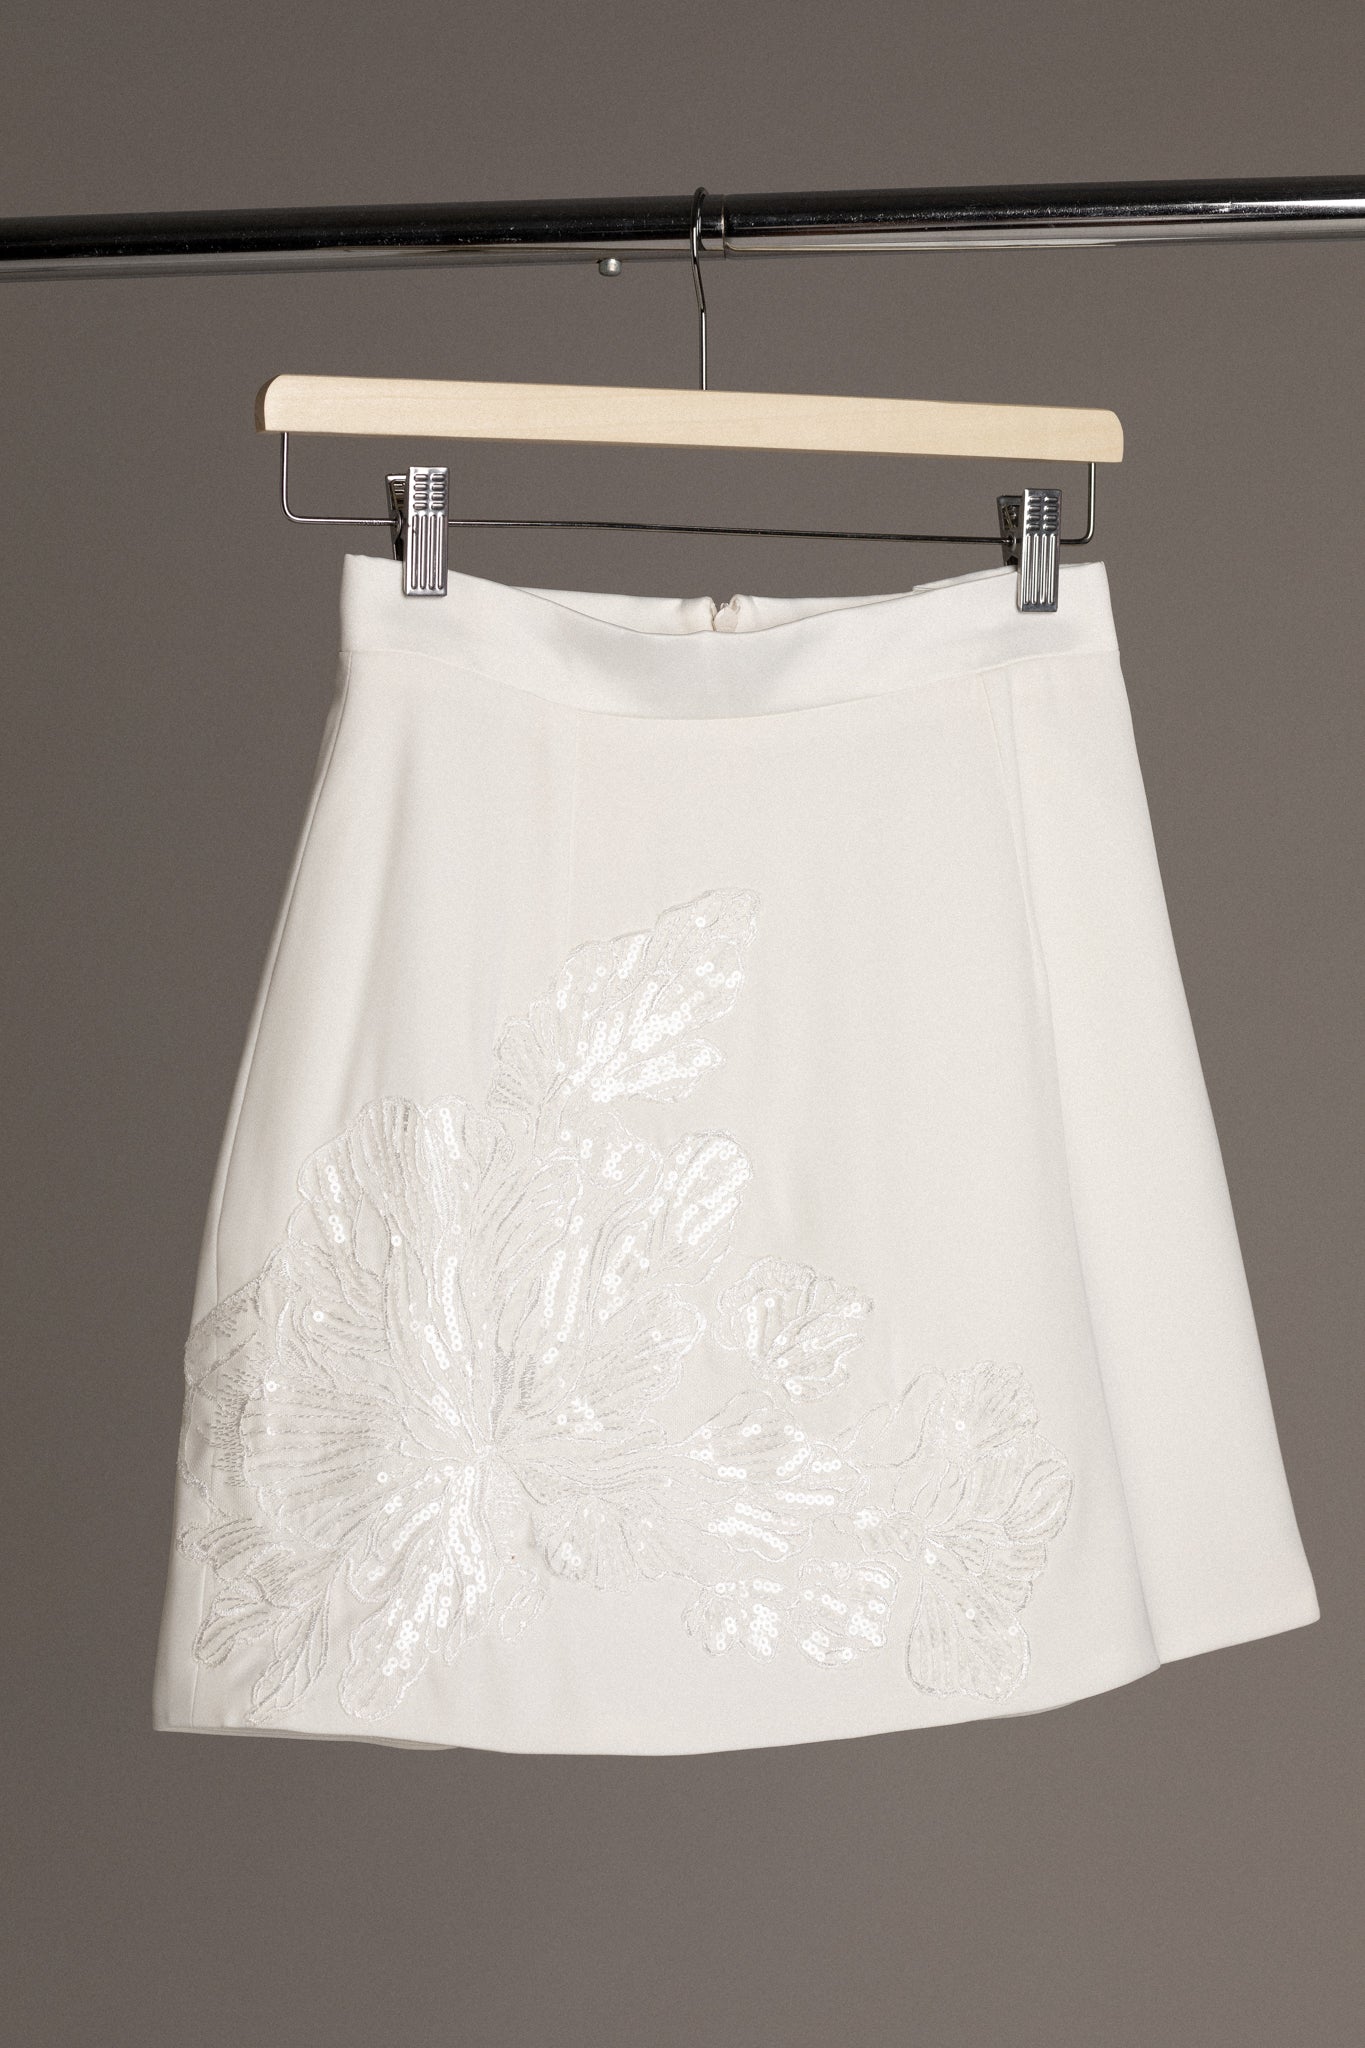 MINI SKIRT WITH FRENCH APPLIQUE